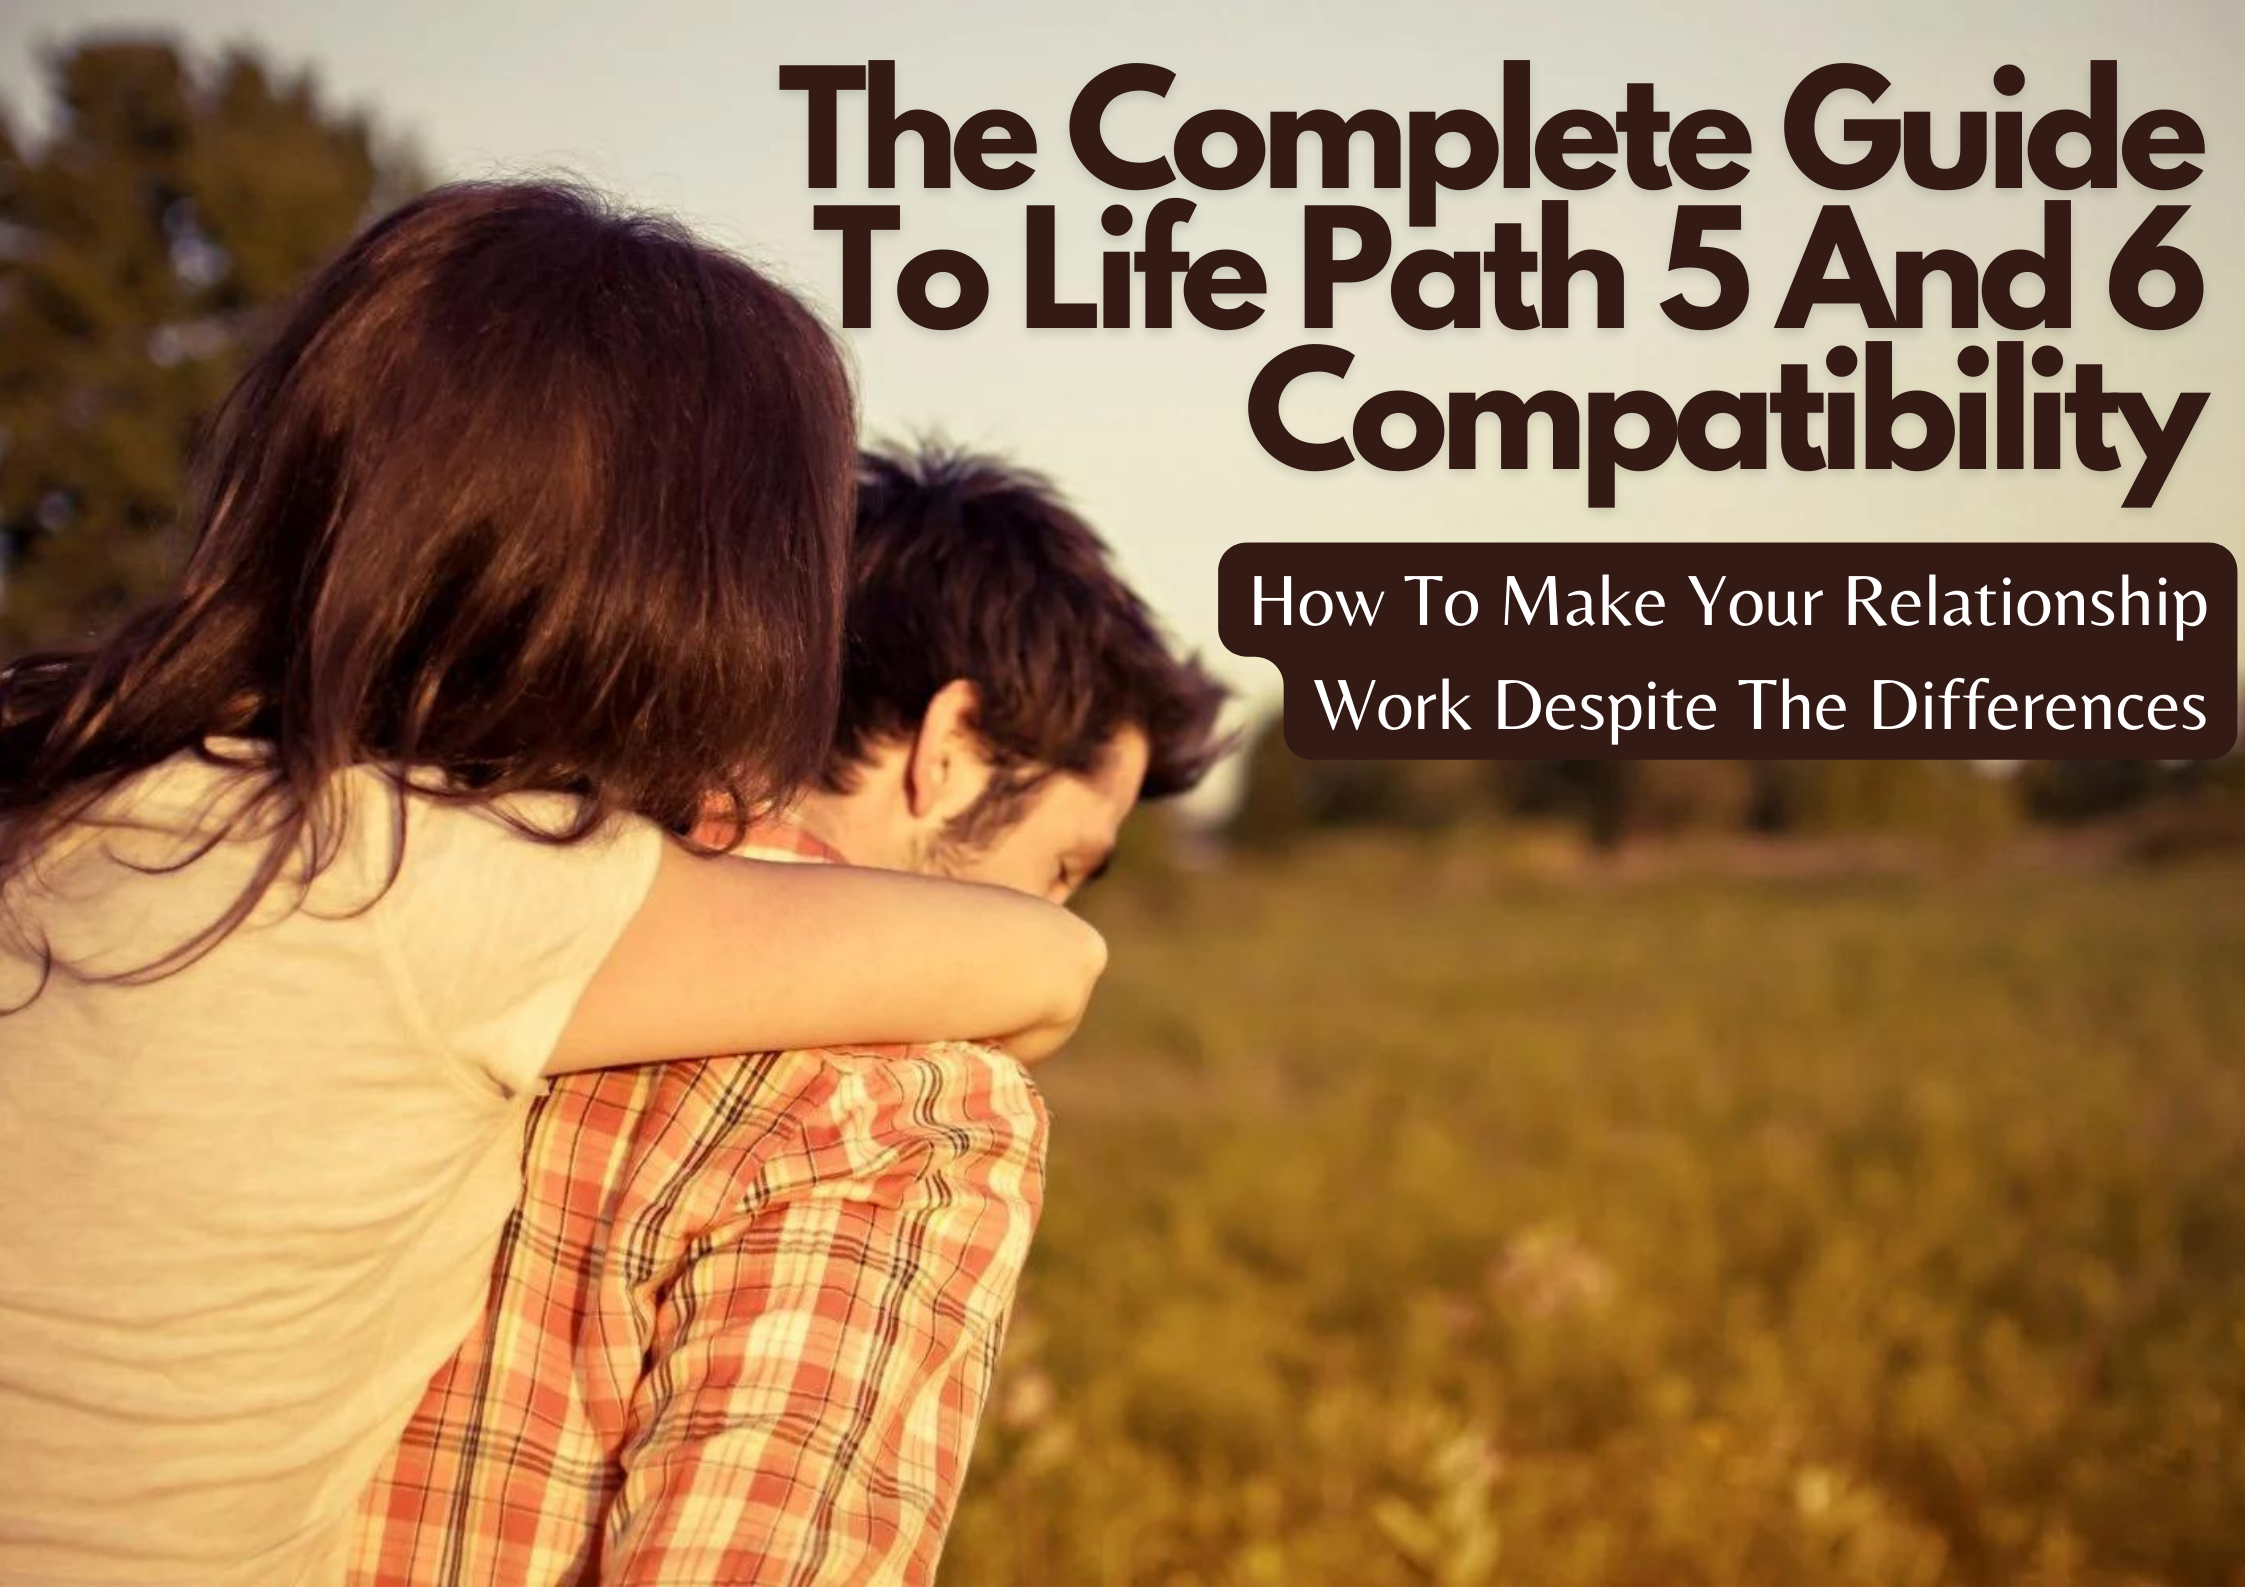 Life Path 5 And 6 Compatibility - How To Make Your Relationship Work Despite The Differences